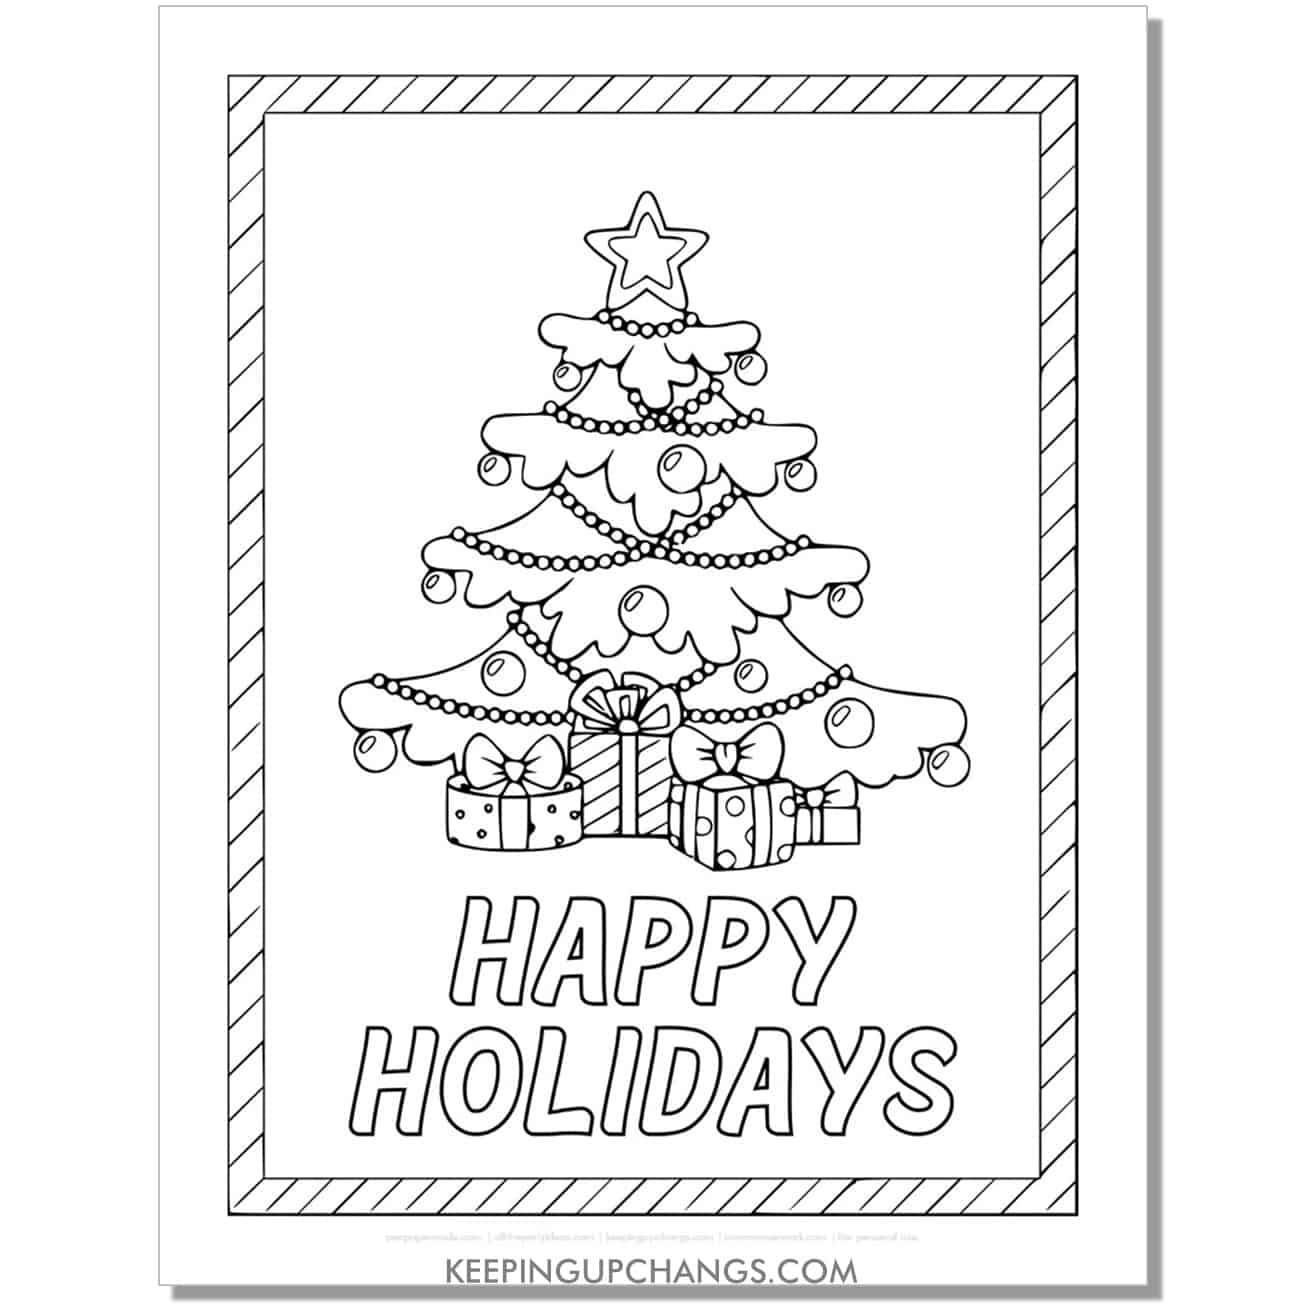 https://keepingupchangs.com/wp-content/uploads/free-full-size-happy-holidays-christmas-tree-coloring-page-colouring-sheet.jpg